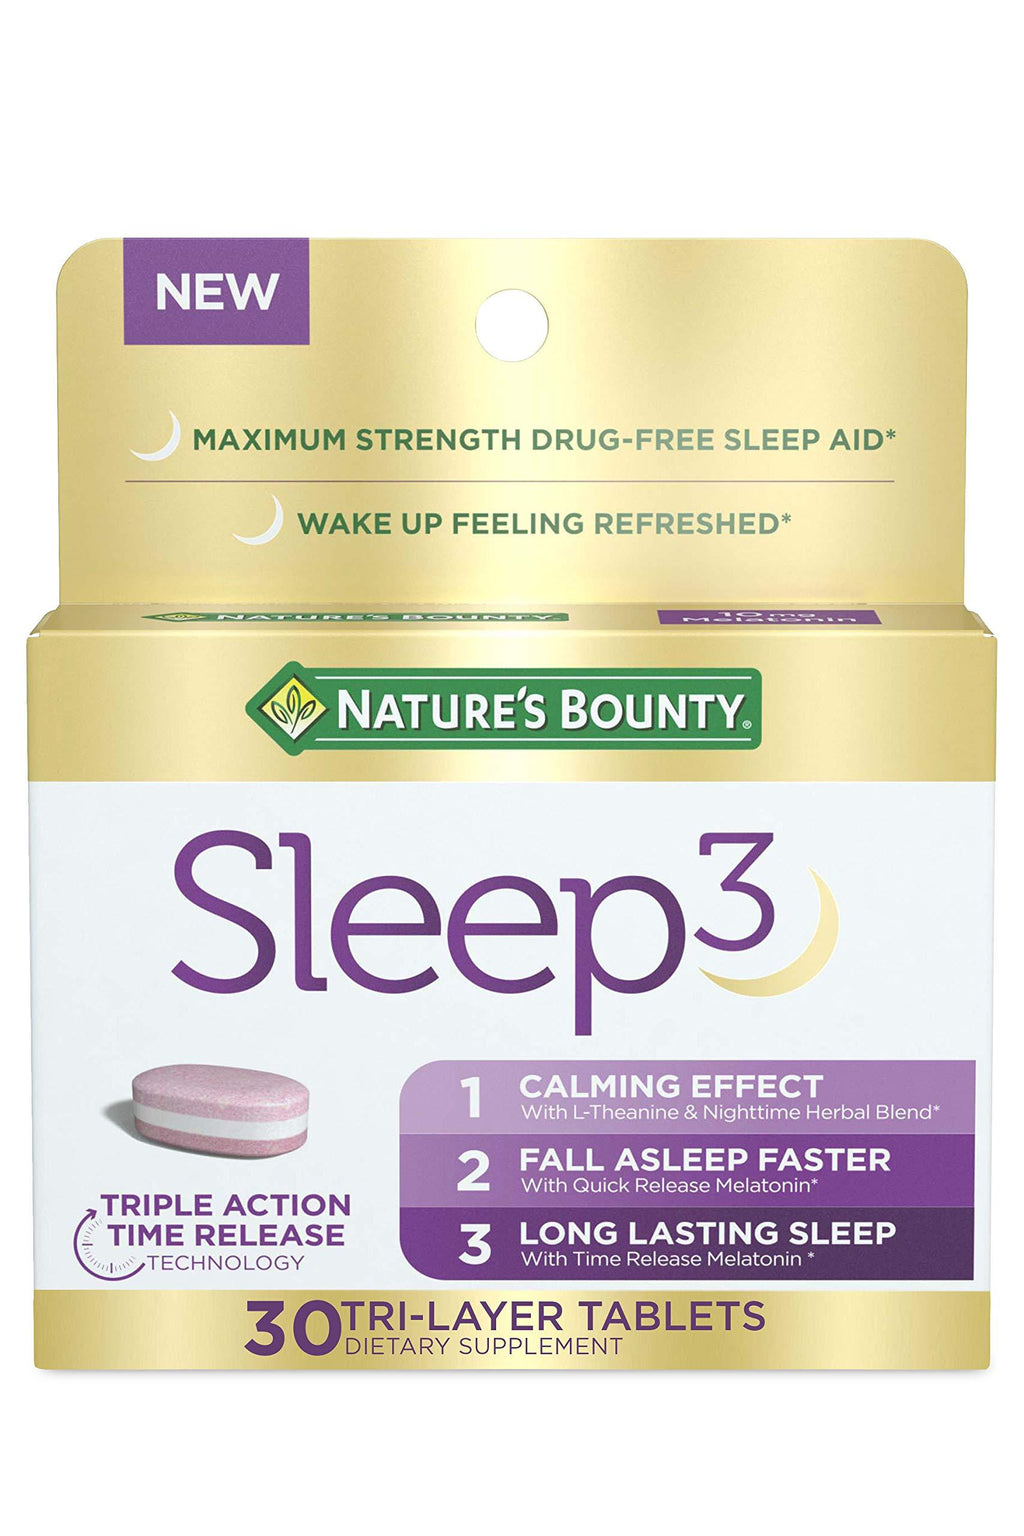 Melatonin by Nature's Bounty, Sleep3 Maximum Strength 100% Drug Free Sleep Aid, Dietary Supplement, L-Theanine & Nighttime Herbal Blend Time Release Technology, 10mg, 30 Tri-Layered Tablets 30 Count (Pack of 1) - BeesActive Australia